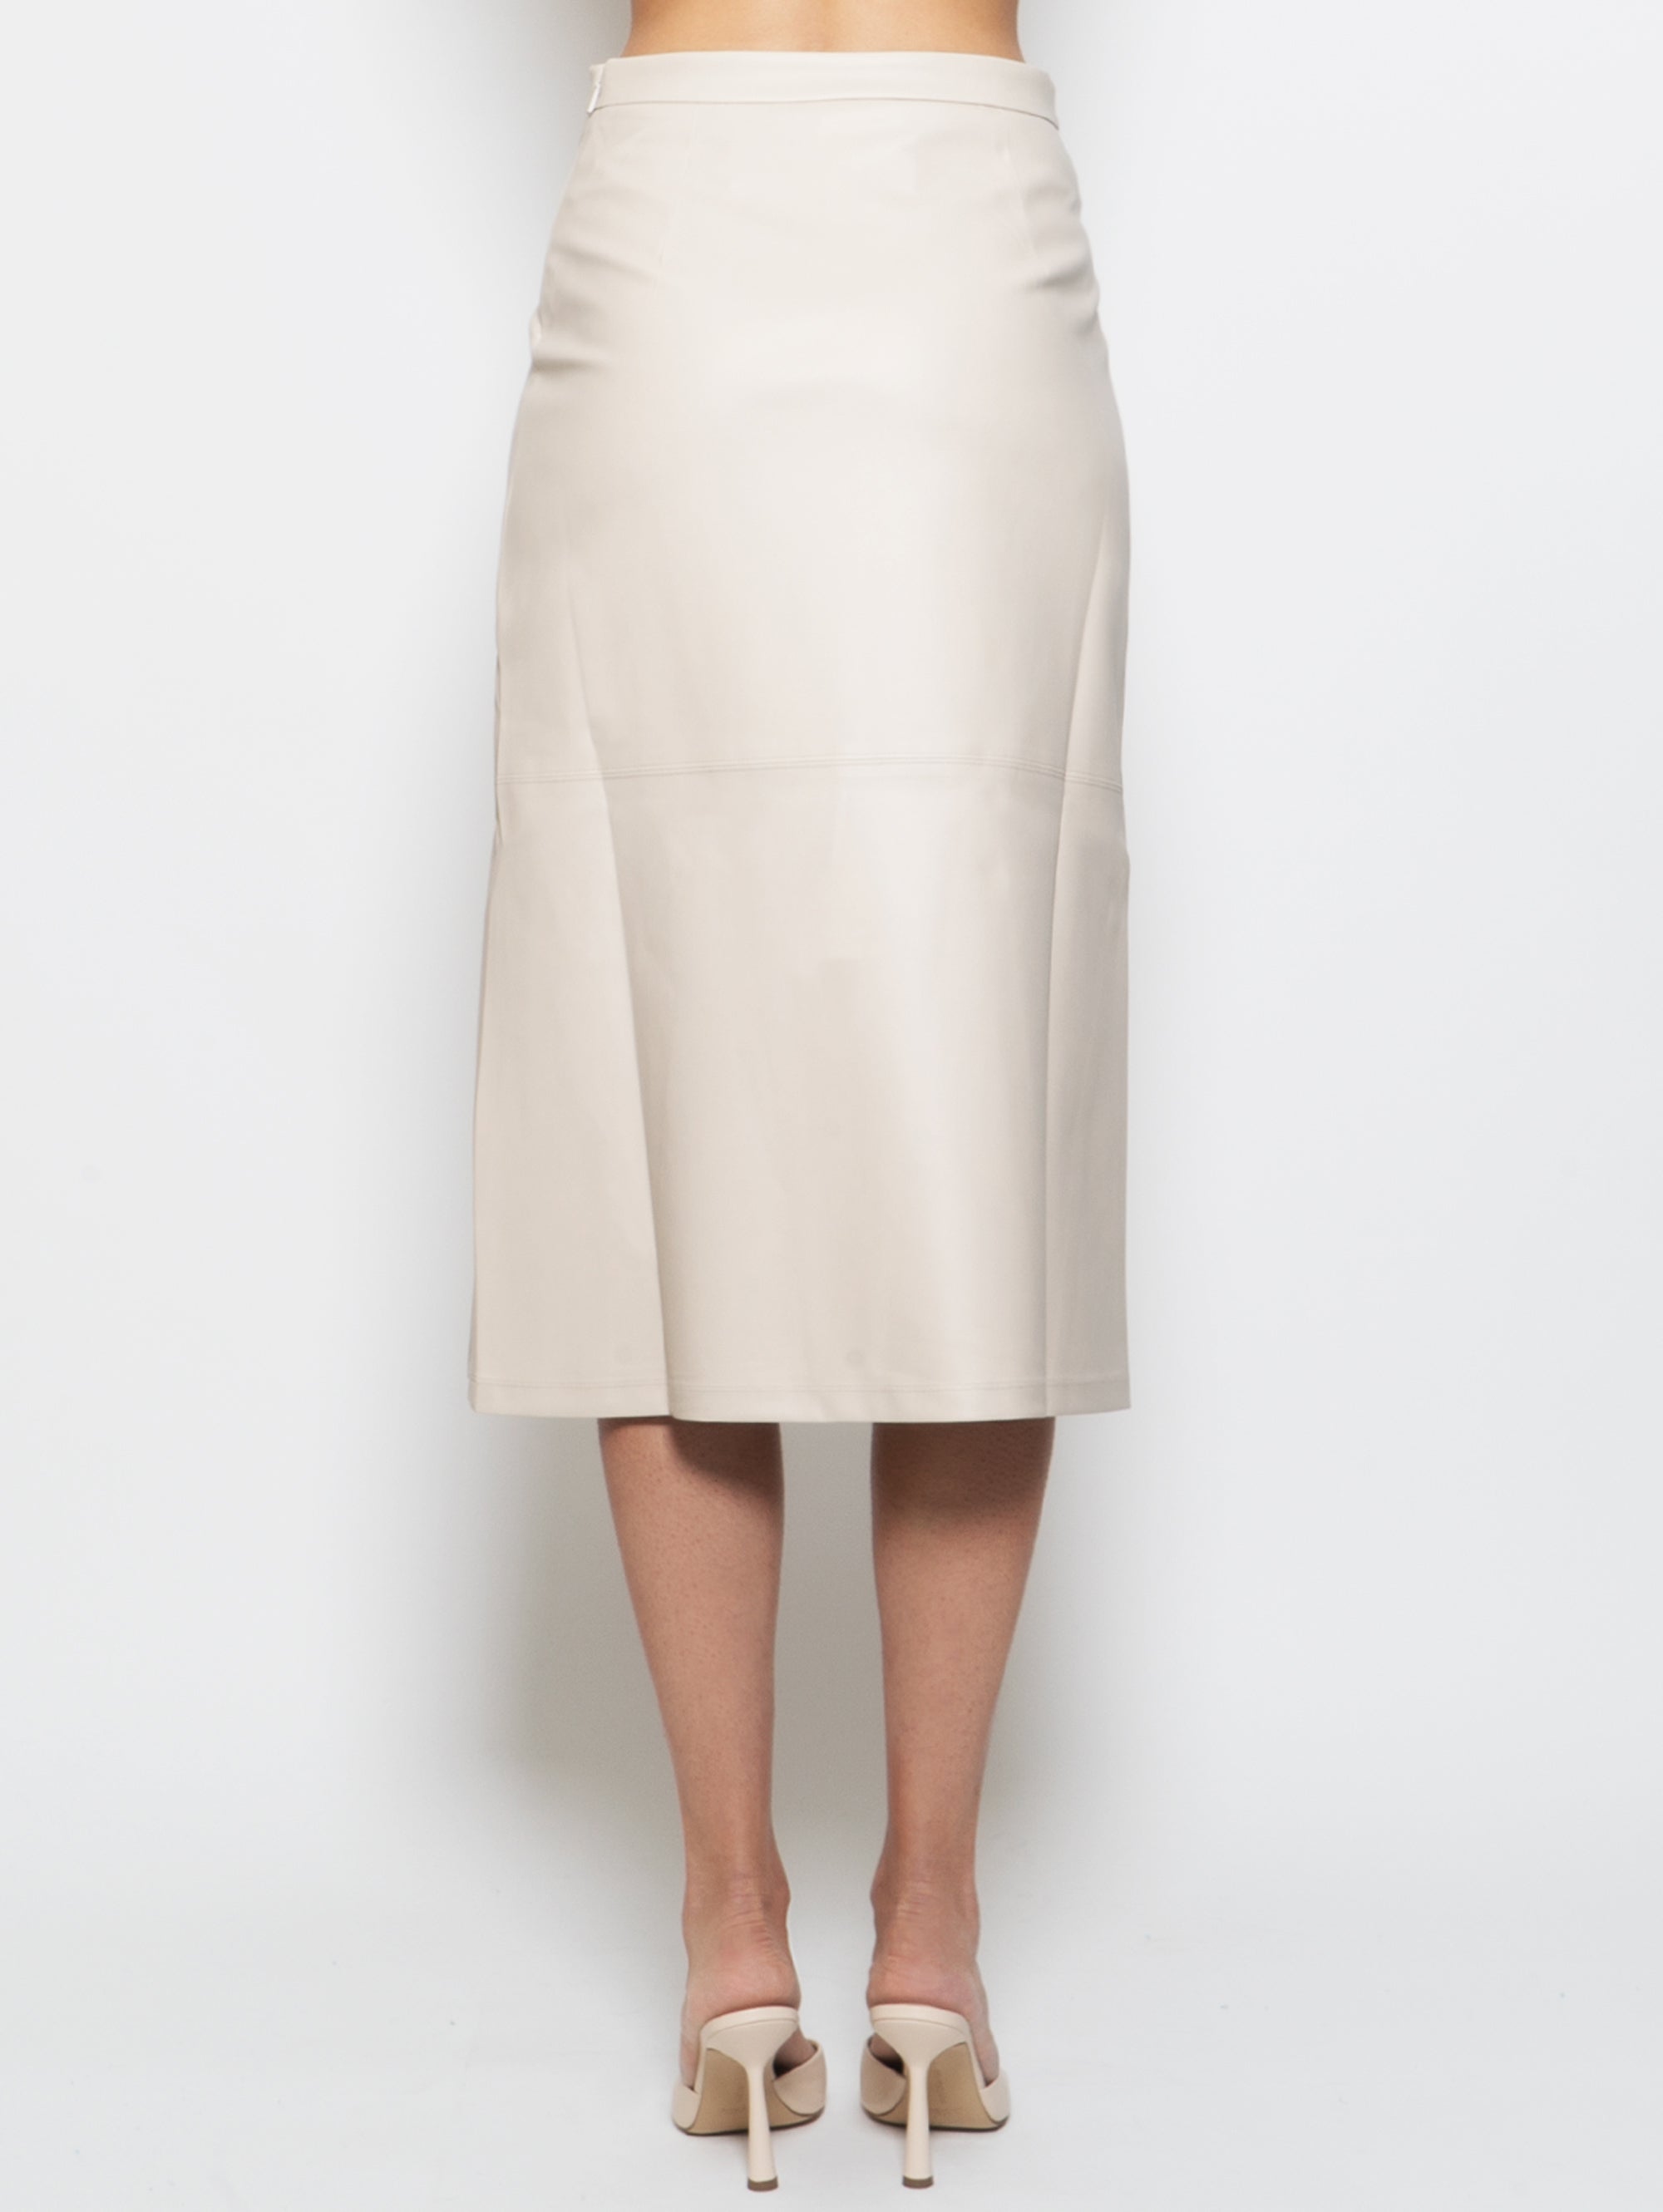 Midi Skirt in Ivory Faux Leather